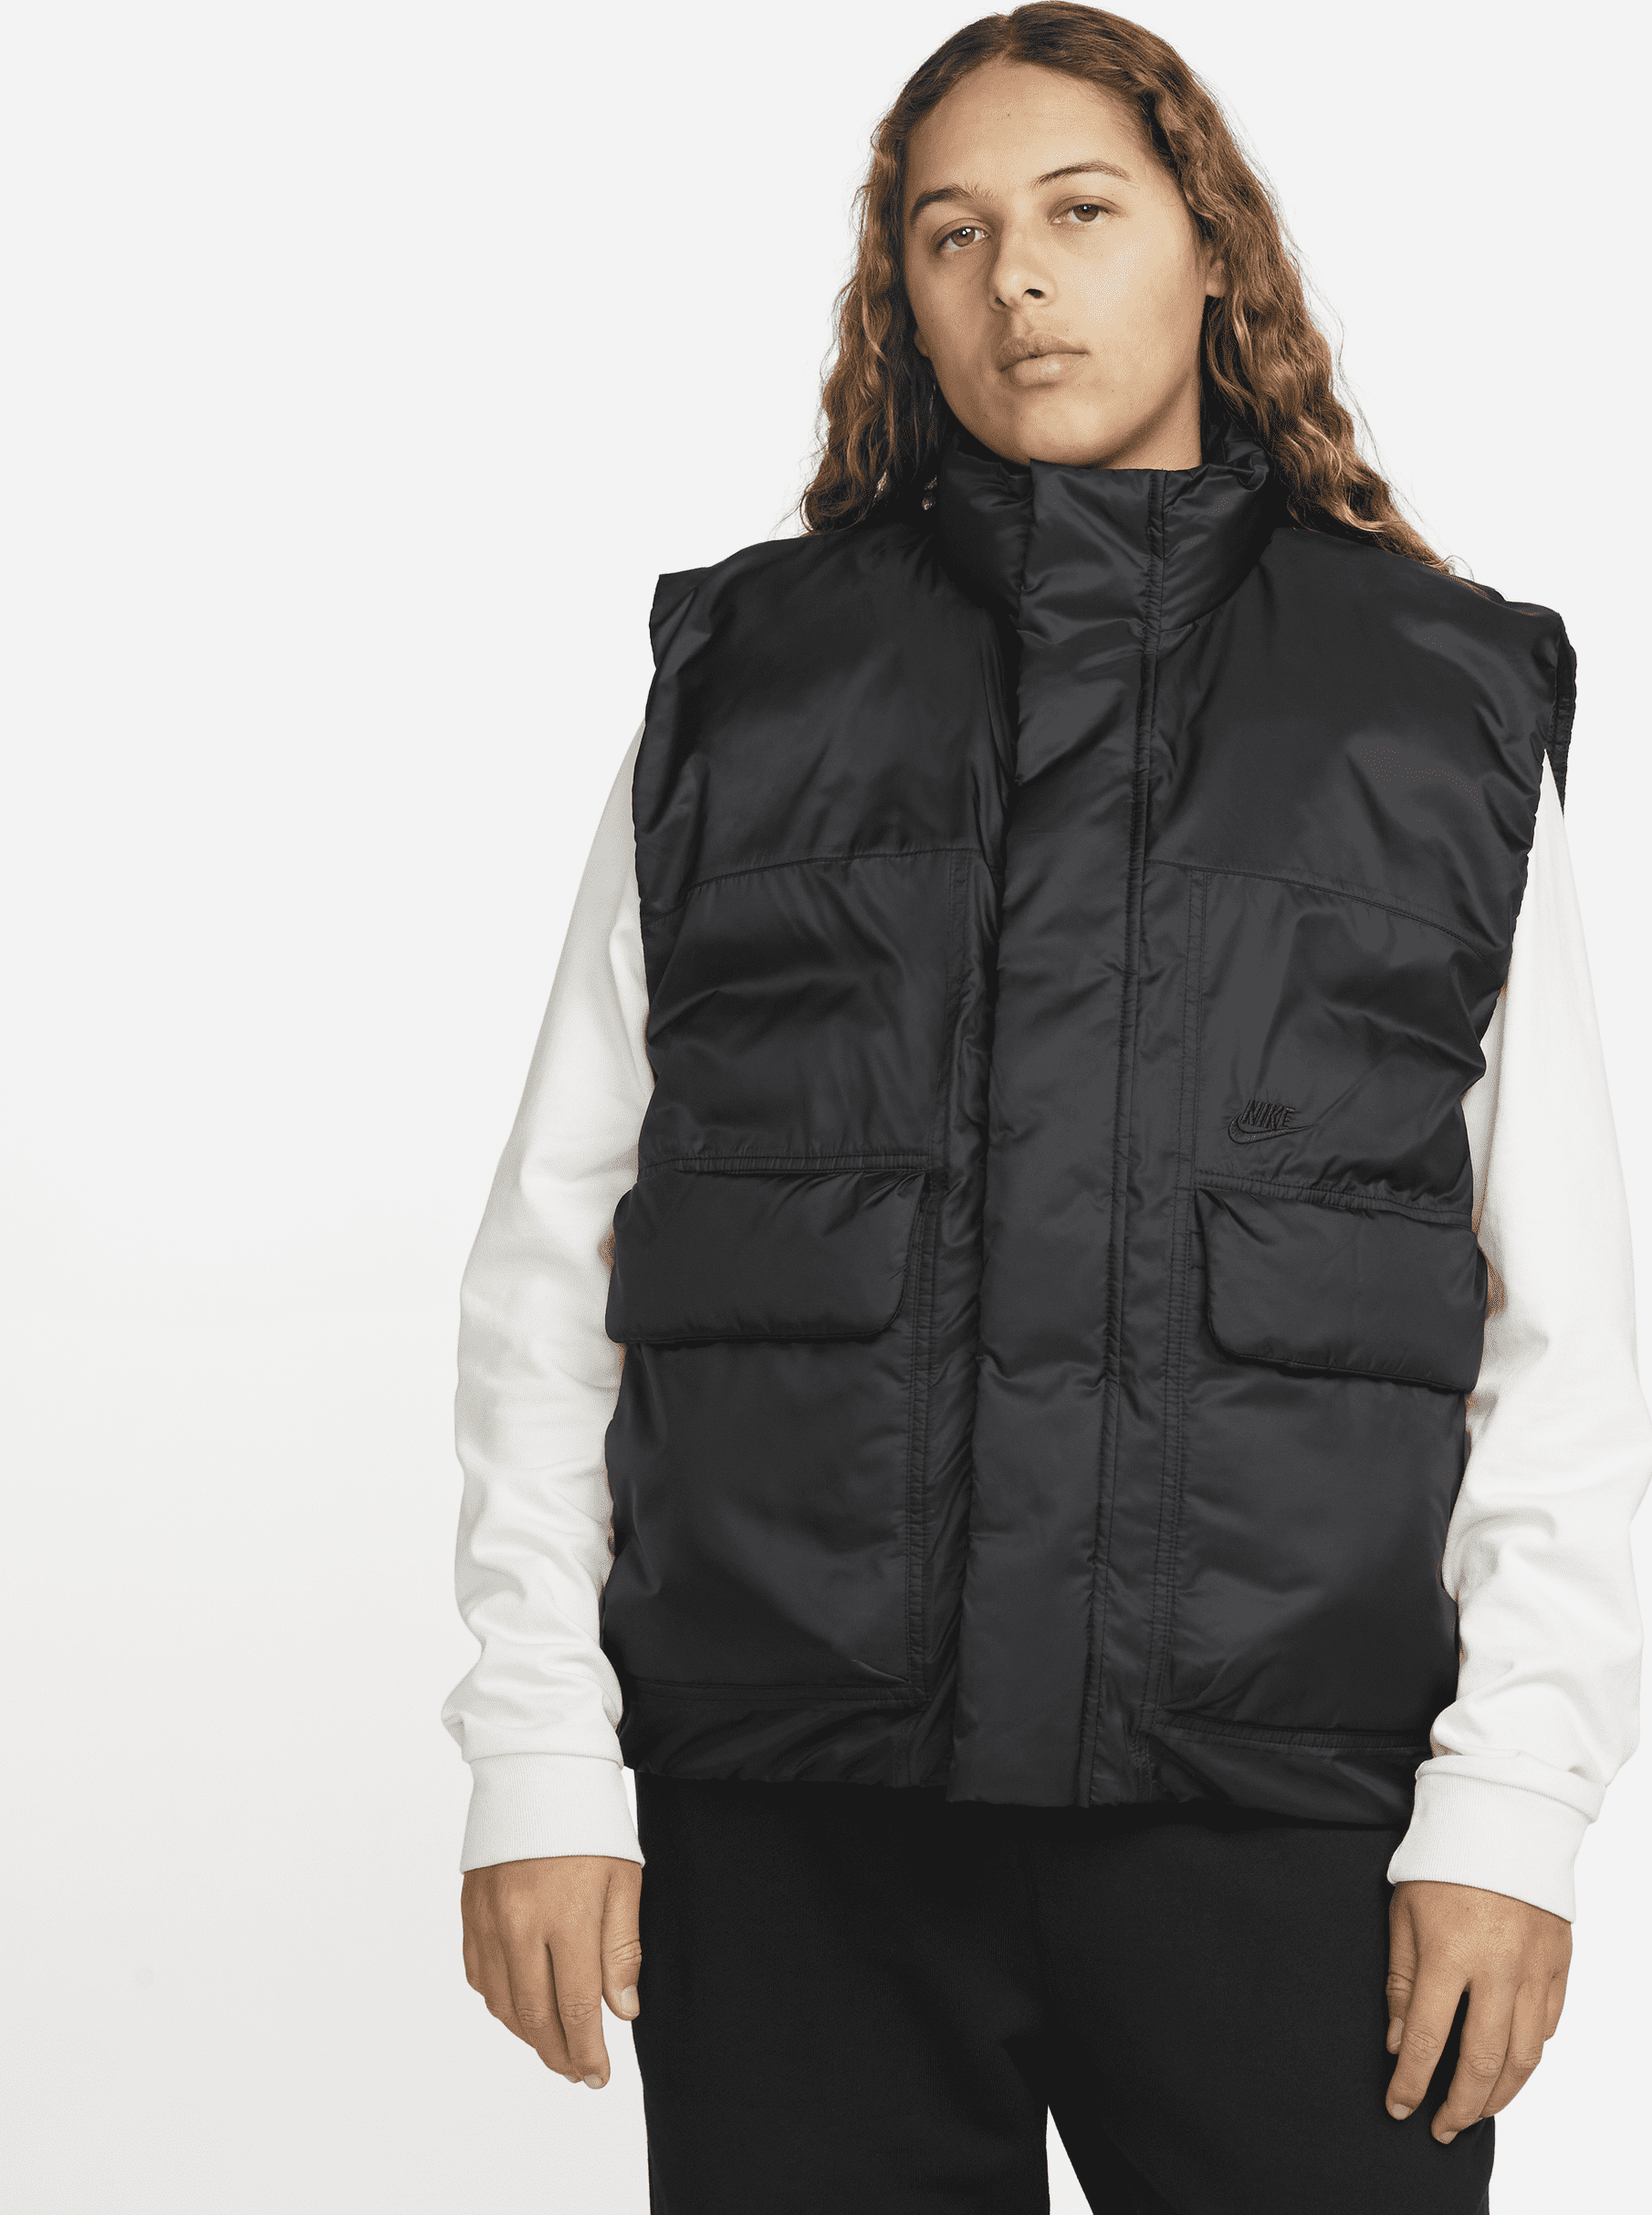 Mens nike gilet Nike Tech Pack Insulated Woven Vest